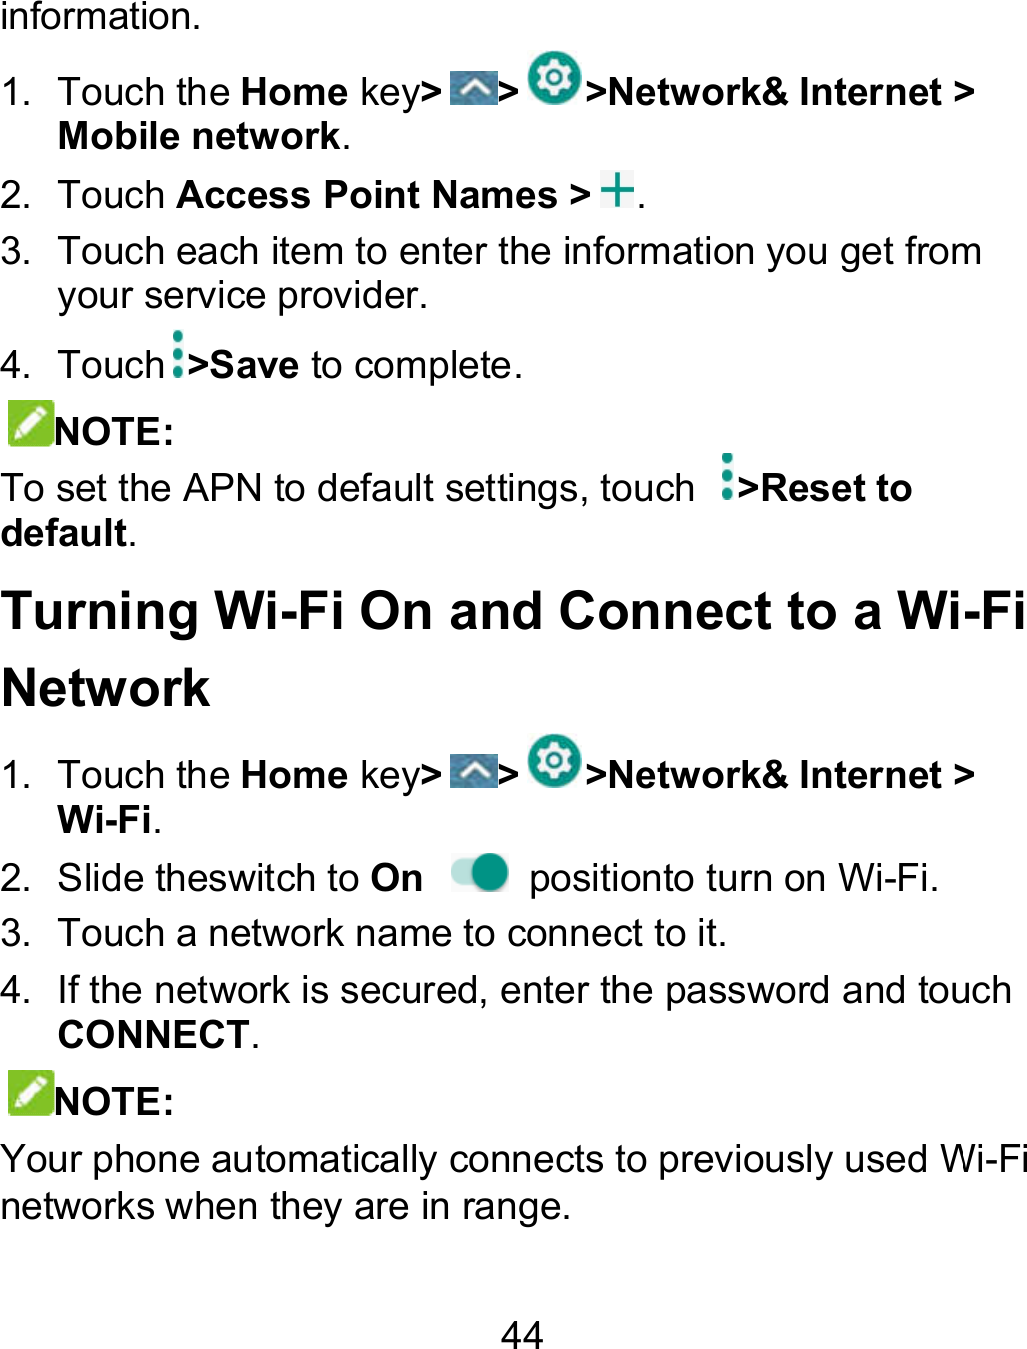 44 information. 1.  Touch the Home key&gt; &gt; &gt;Network&amp; Internet &gt; Mobile network. 2.  Touch Access Point Names &gt; . 3.  Touch each item to enter the information you get from your service provider. 4.  Touch &gt;Save to complete. NOTE: To set the APN to default settings, touch  &gt;Reset to default.   Turning Wi-Fi On and Connect to a WiNetwork 1.  Touch the Home key&gt; &gt; &gt;Network&amp; Internet &gt;Wi-Fi. 2.  Slide theswitch to On    positionto turn on Wi-Fi.  3.  Touch a network name to connect to it. 4. If the network is secured, enter the password and touch CONNECT. NOTE:   Your phone automatically connects to previously used Winetworks when they are in range. Internet &gt; each item to enter the information you get from -Fi &amp; Internet &gt;  If the network is secured, enter the password and touch Your phone automatically connects to previously used Wi-Fi 